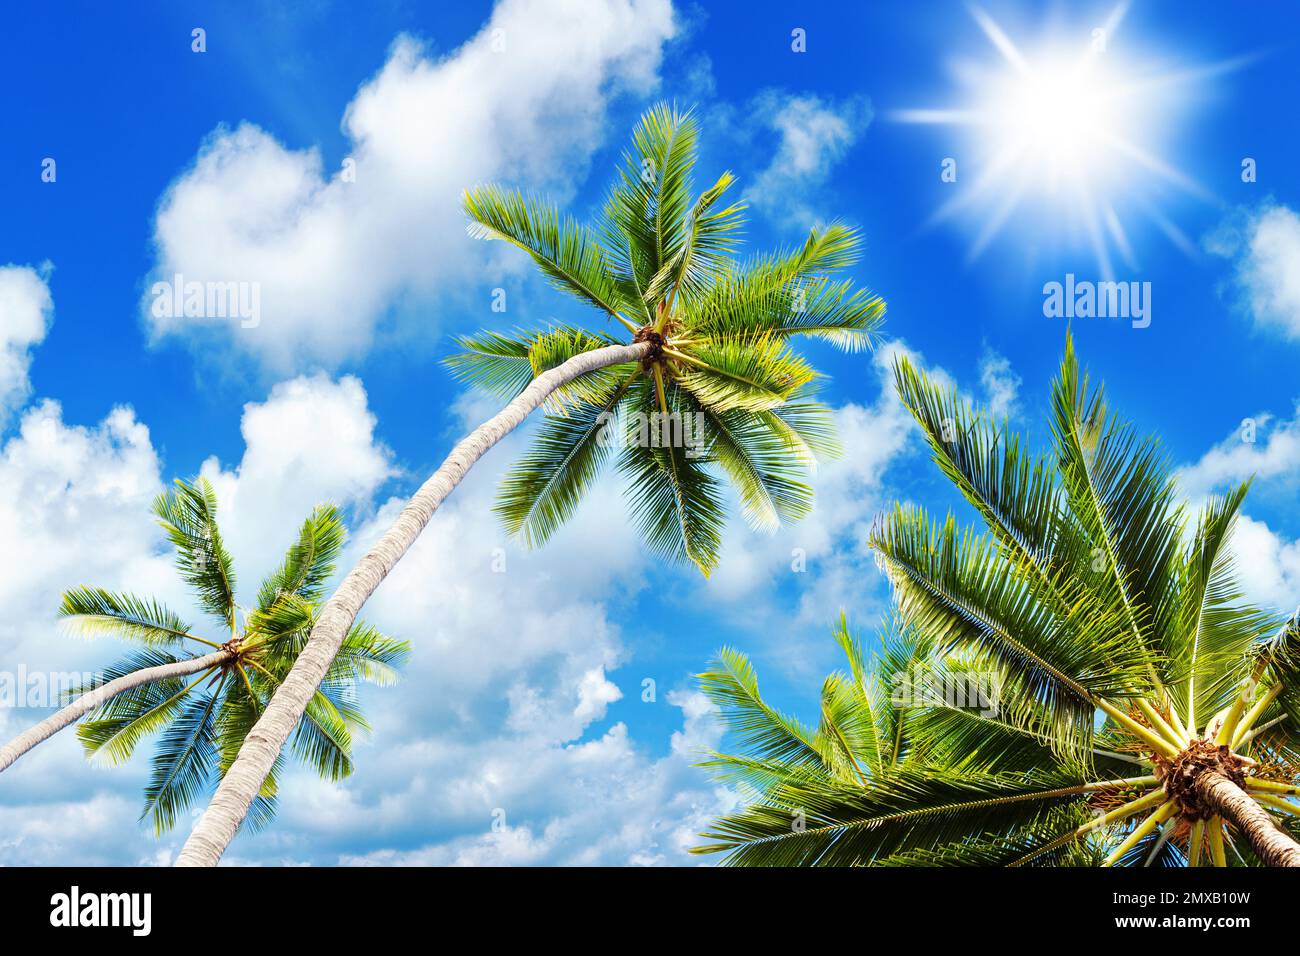 Palm tree green branches, sun blue sky white cloud background, coconut palms leaves, tropical sea island beach, ocean coast landscape, summer holidays Stock Photo